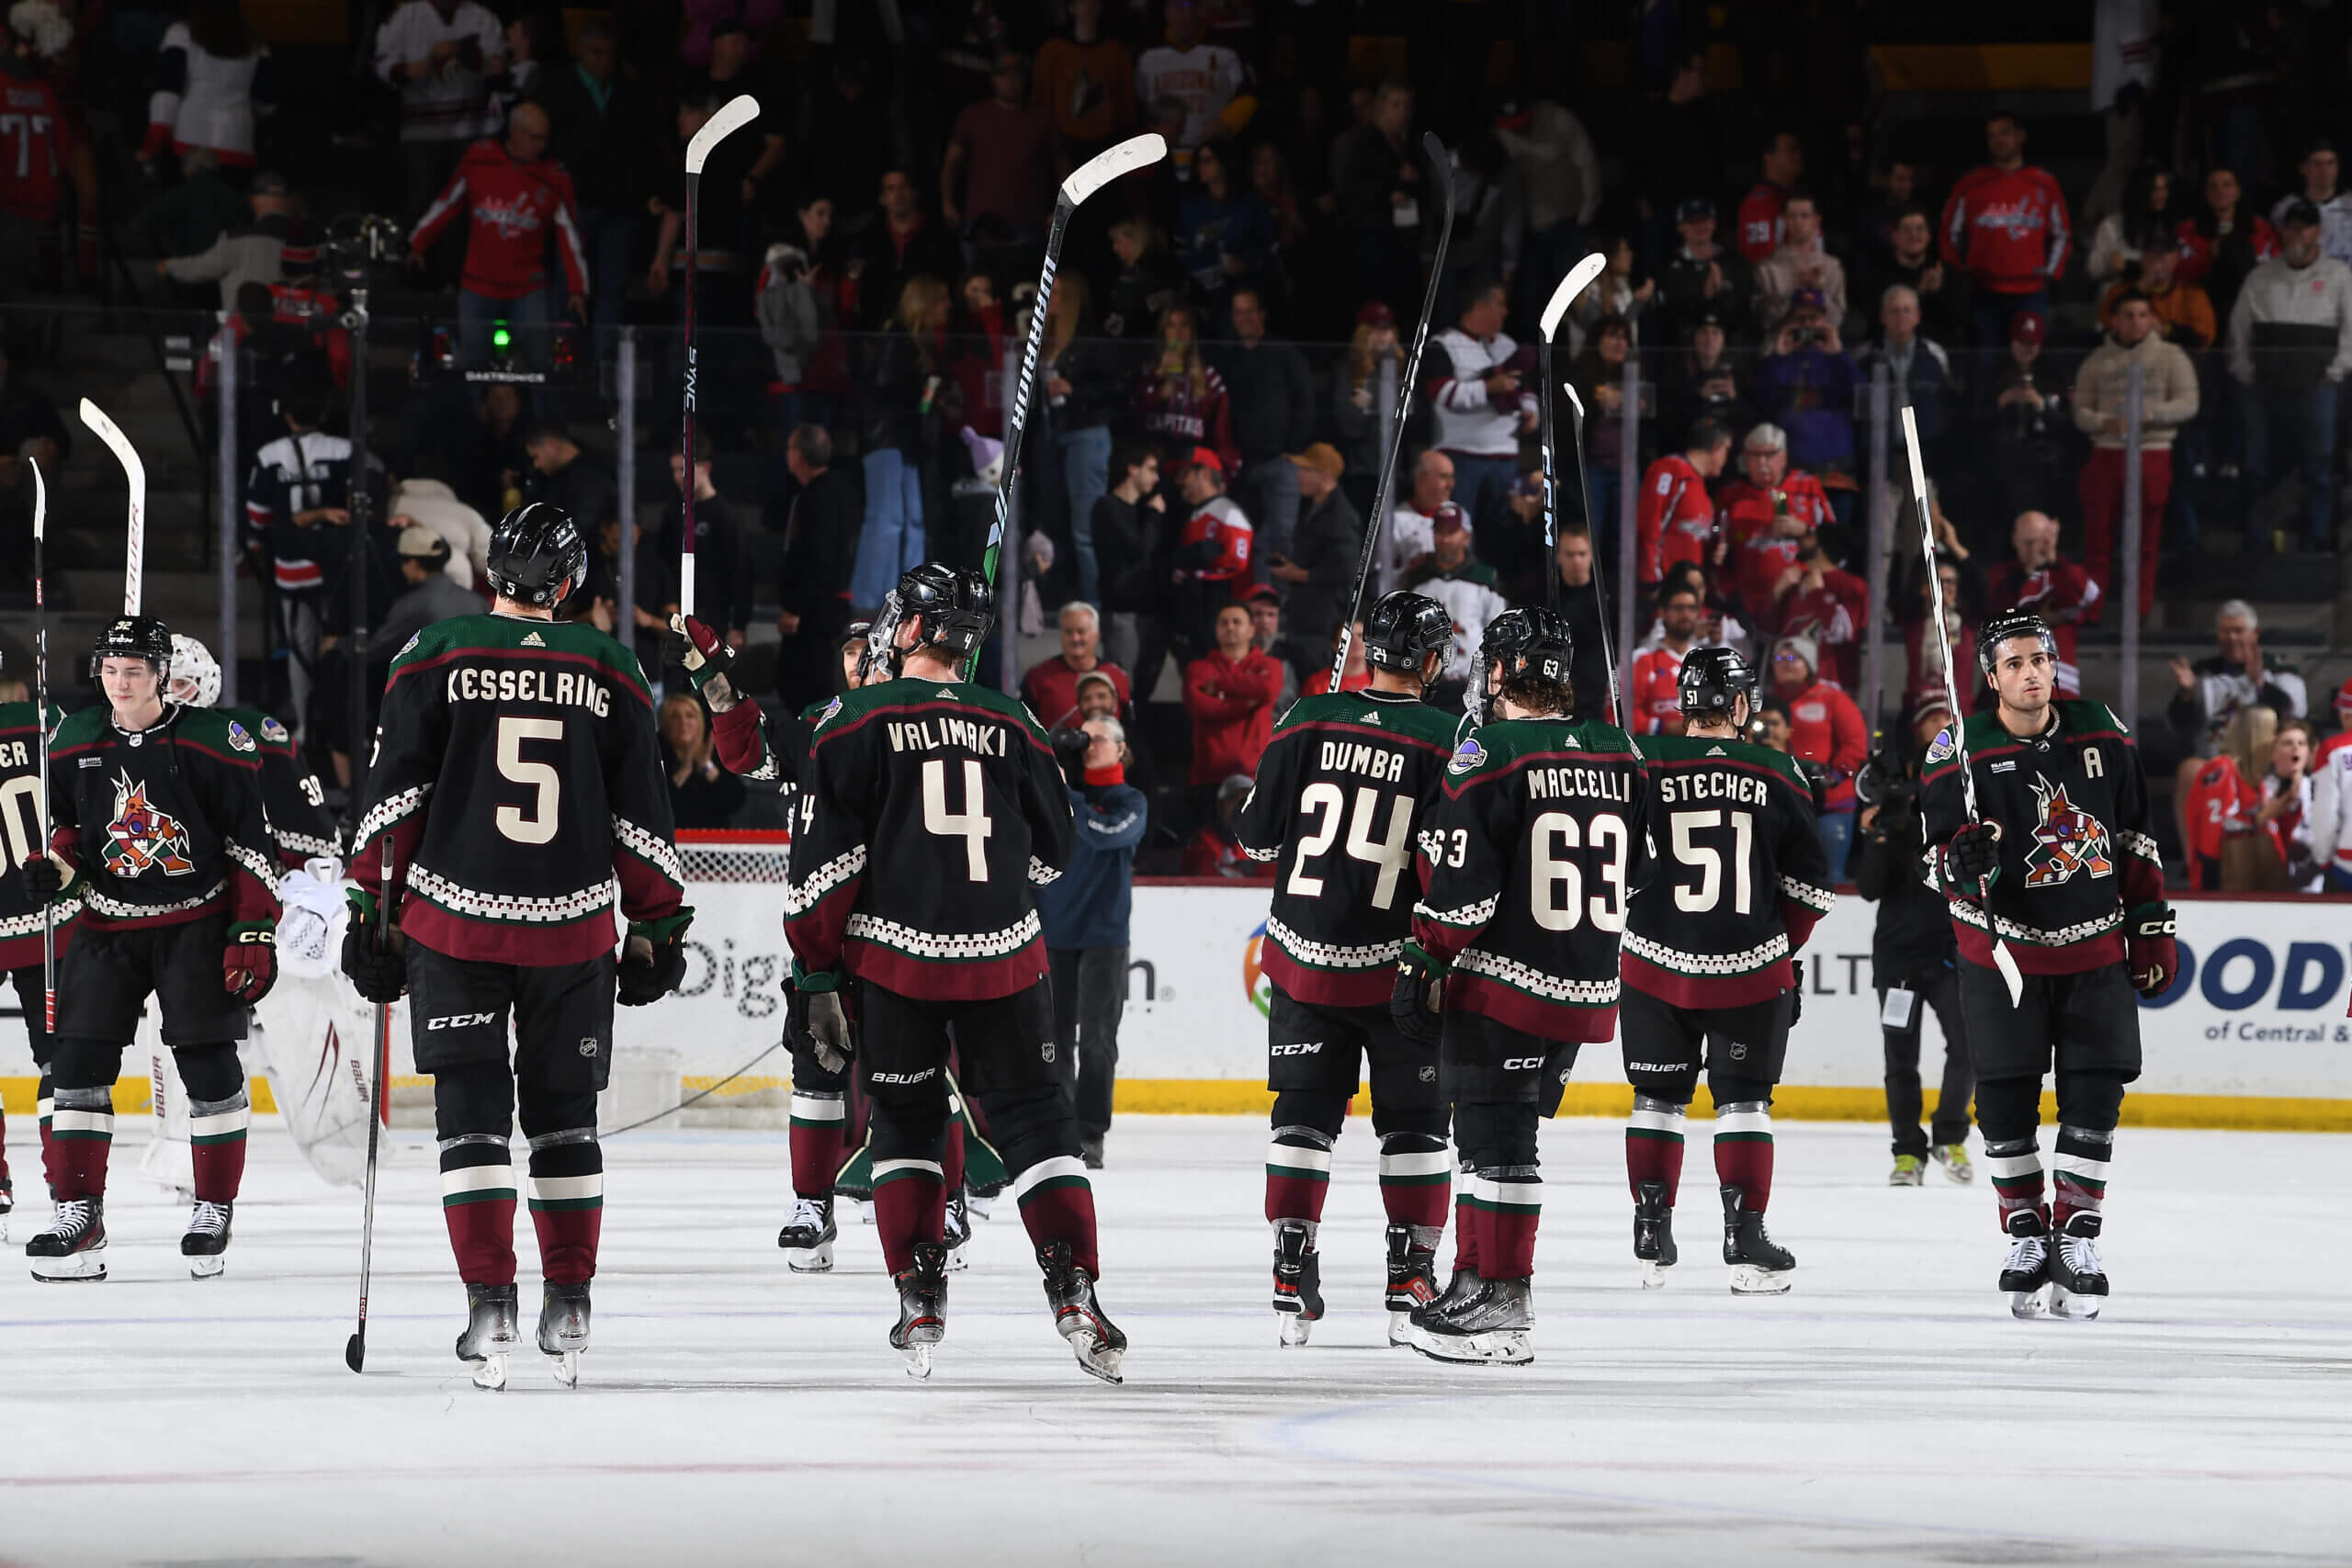 Resignation reigns as Coyotes brace for potential Arizona finale, move to Utah: ‘One last game at home’